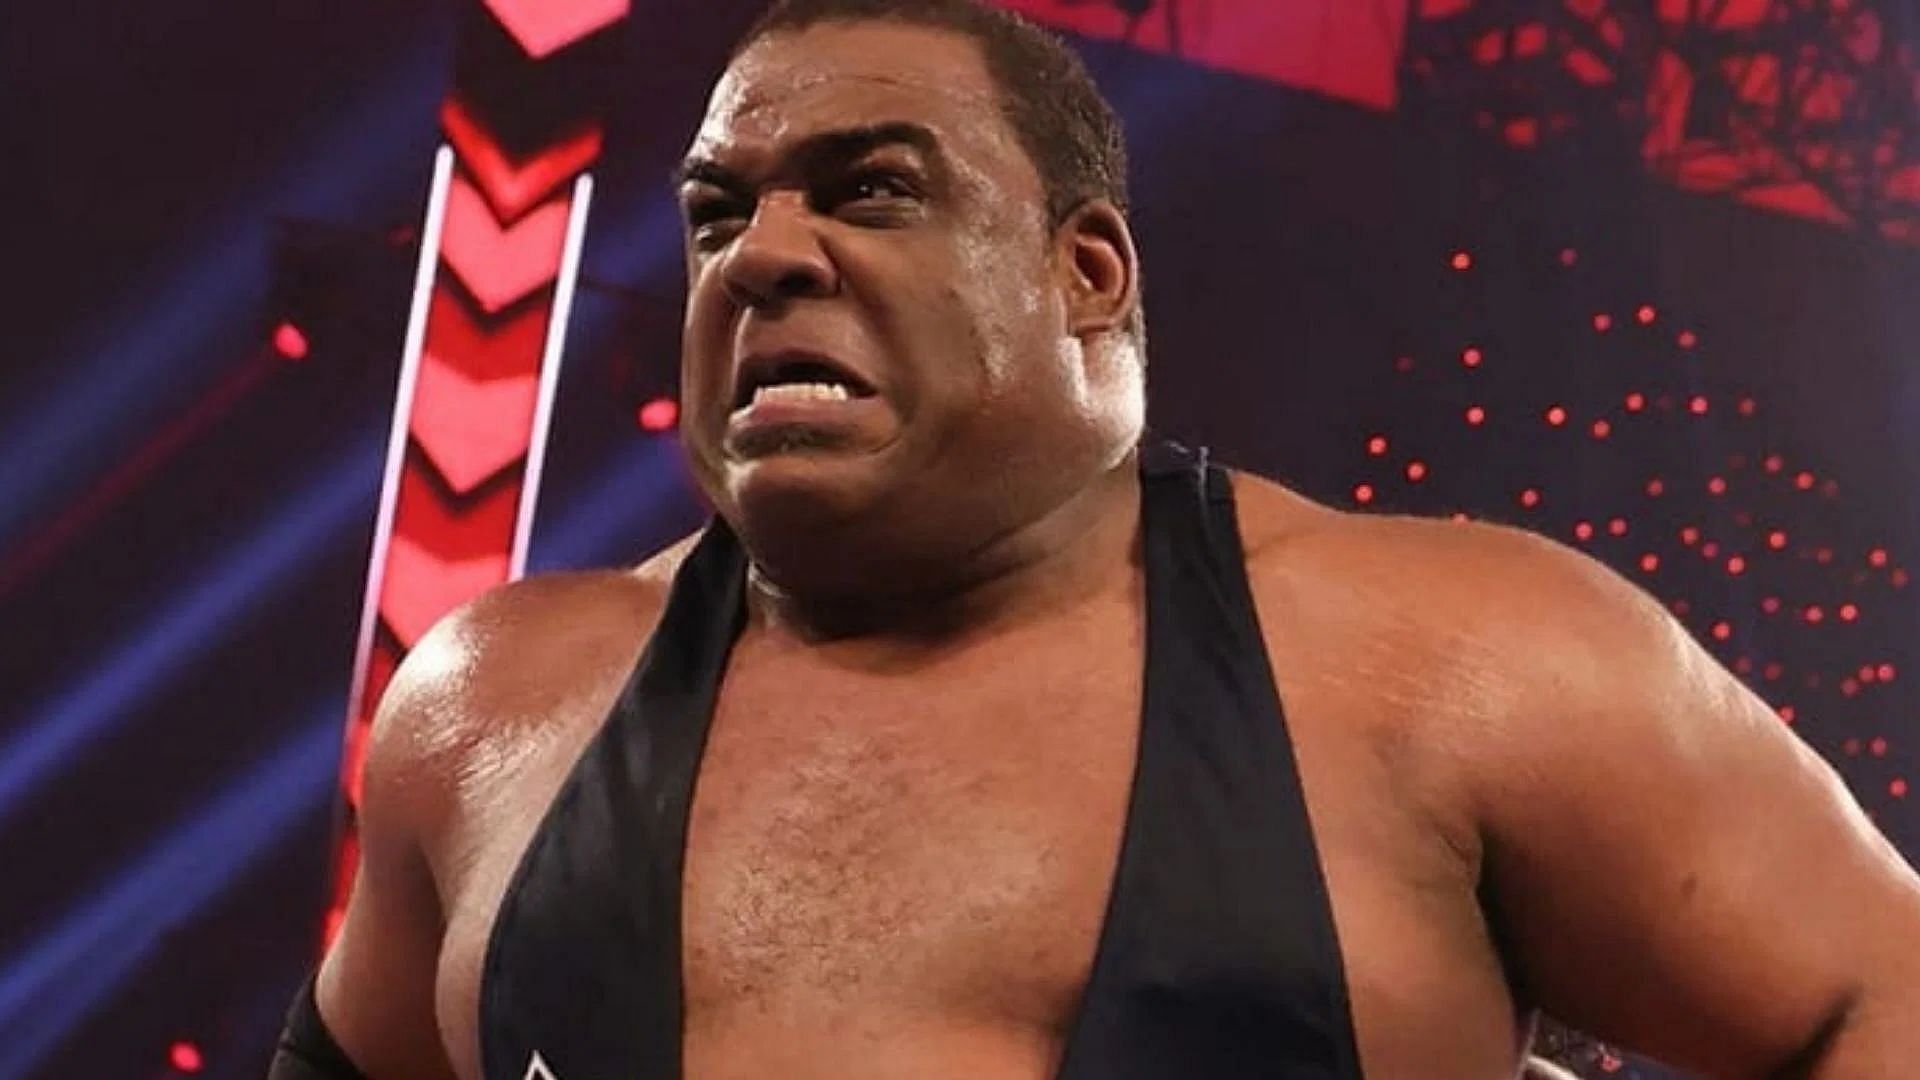 Keith Lee is a former WWE NXT Champion